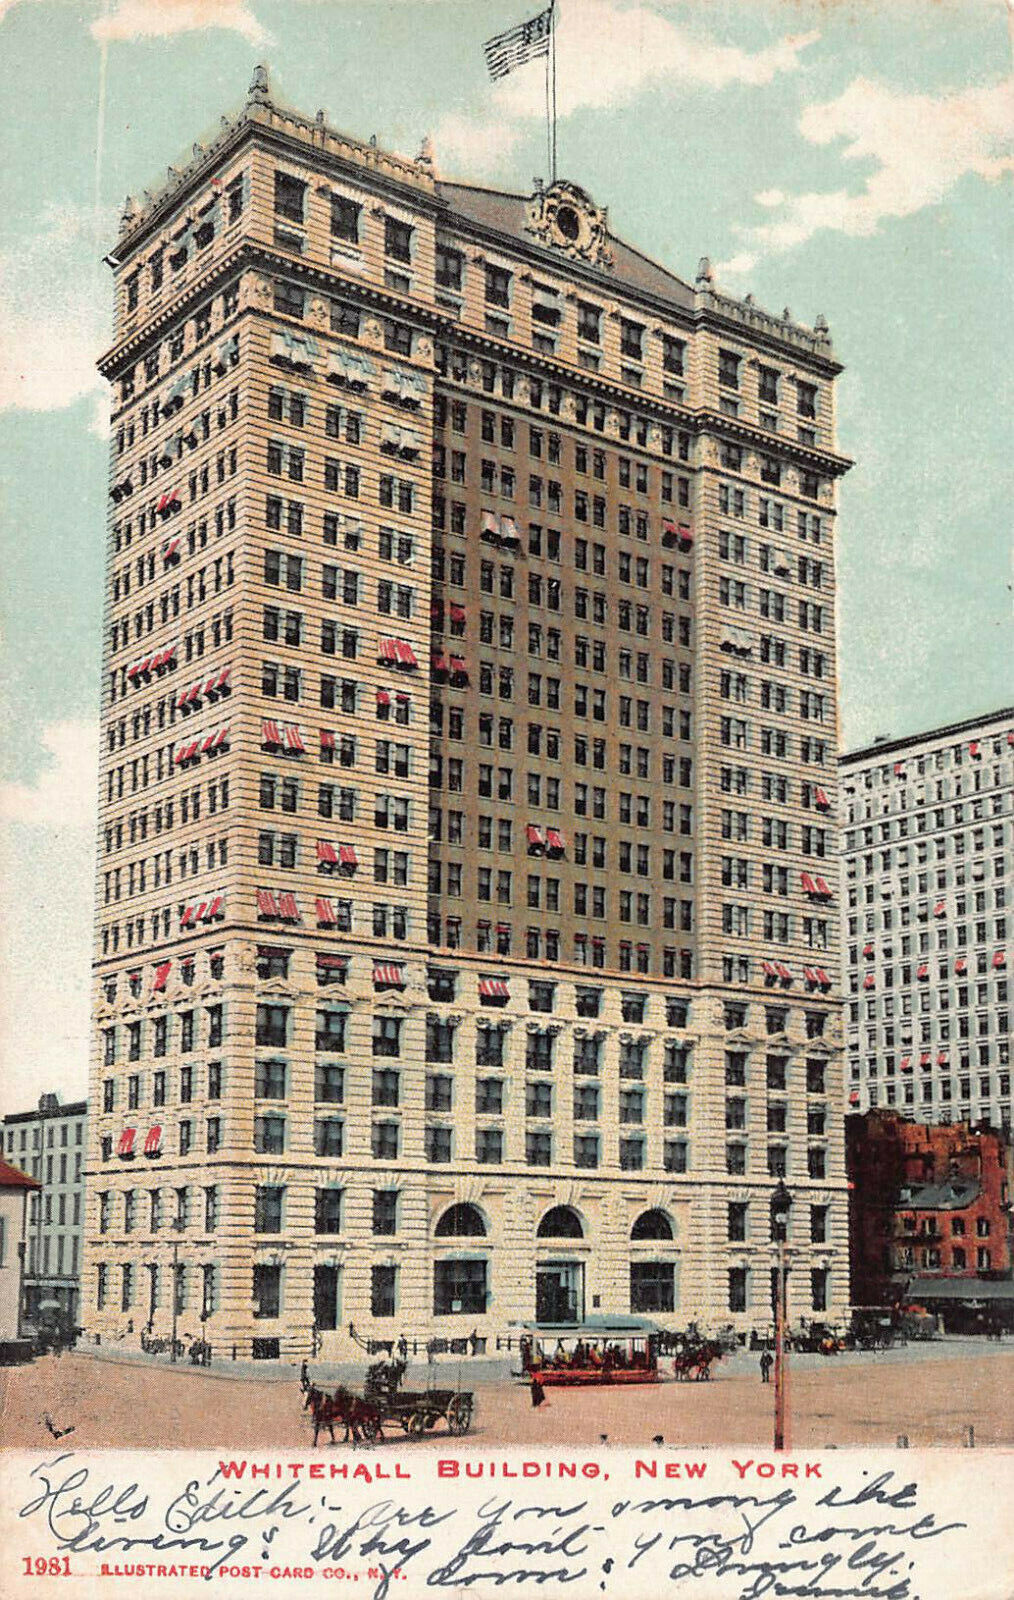 The Whitehall Building, Manhattan, New York City, N.Y., Postcard, Used in 1907